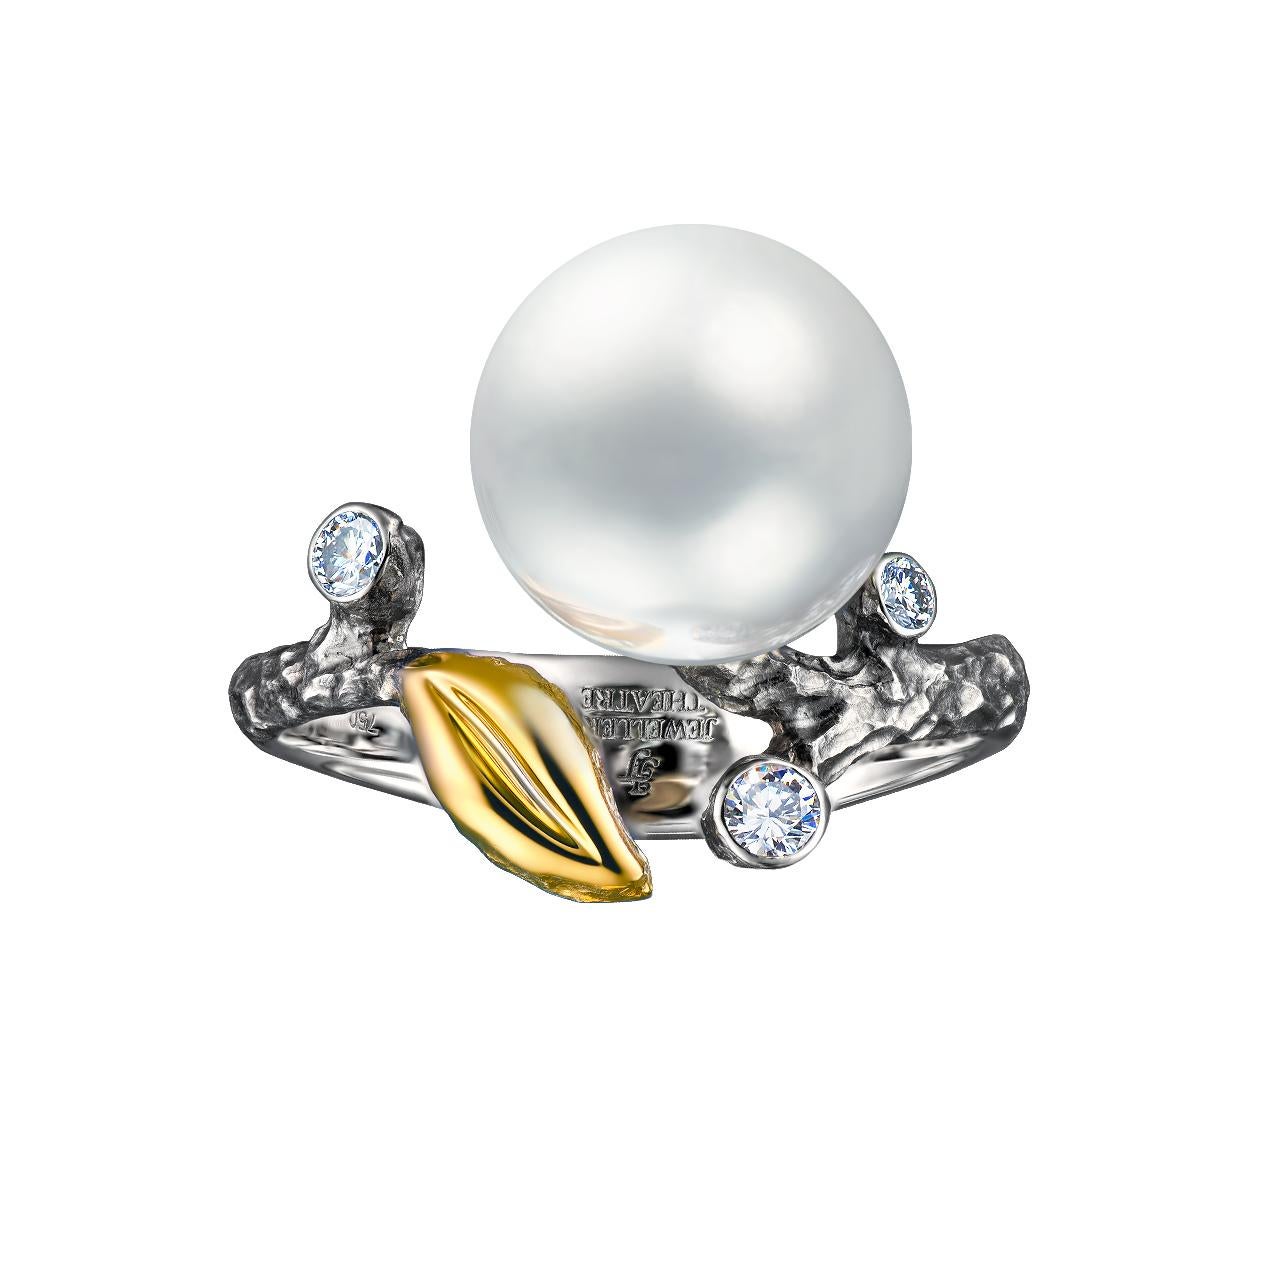 - 4 Round Diamonds - 0,12 ct, F/VS
- 10,5-11 mm White South Sea Pearl
- 14K White Gold 
- Weight: 5.11 g
- Size: 16.5 mm
This ring from the Eden collection features a lustrous White South Sea pearl of 10,5-11 mm diameter. The design is complete with